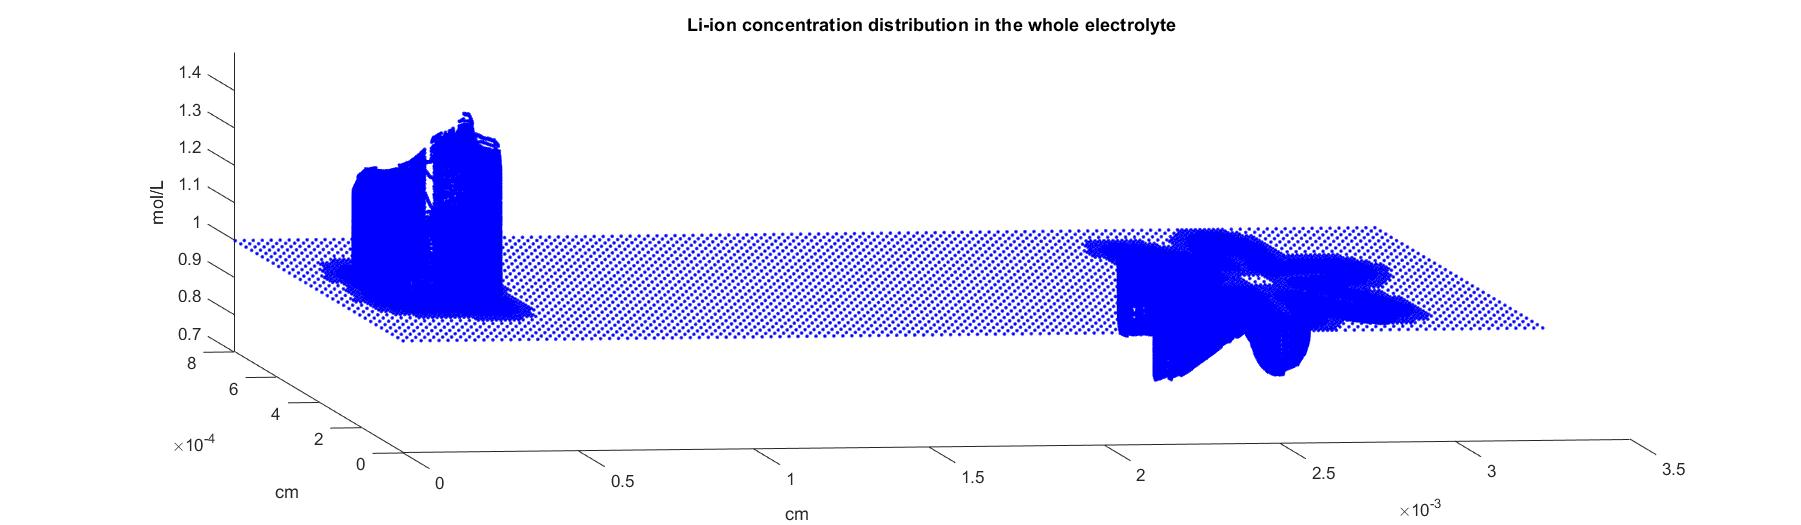 G. Li-ion Concentration Distribution in the Electrolyte